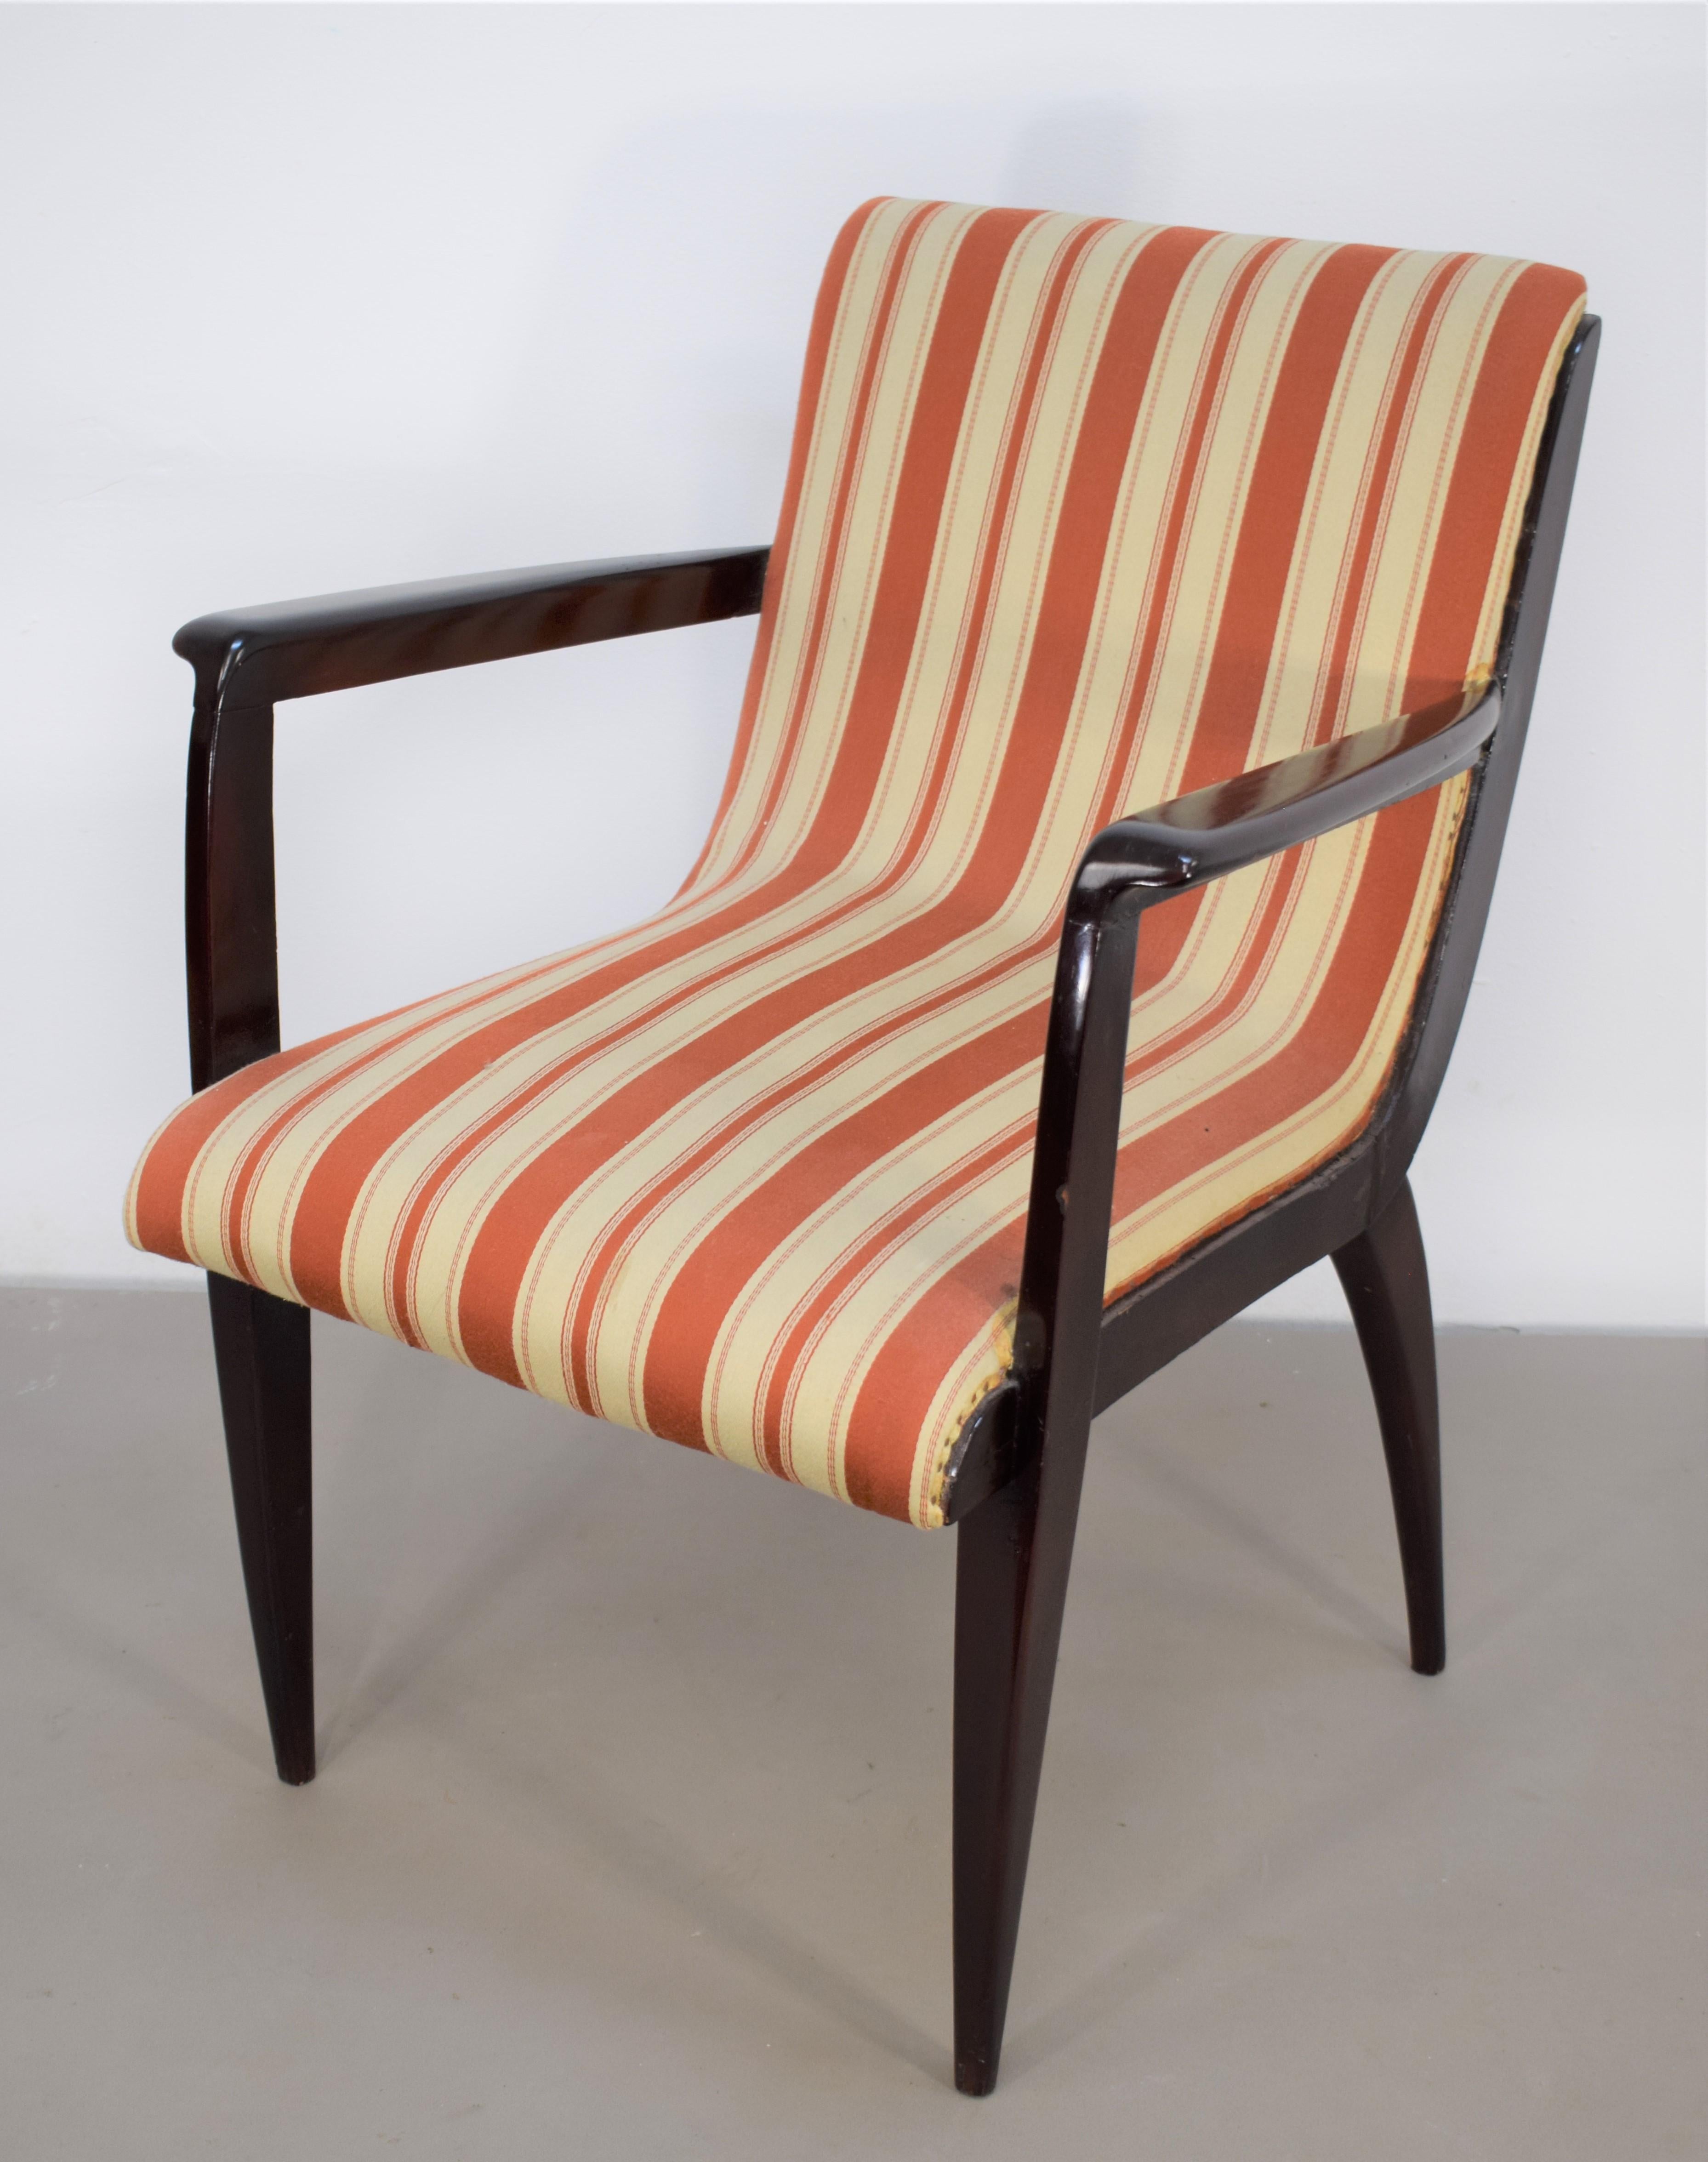 Mid-20th Century Pair of Italian Armchairs Attributed to Guglielmo Ulrich, 1950s For Sale